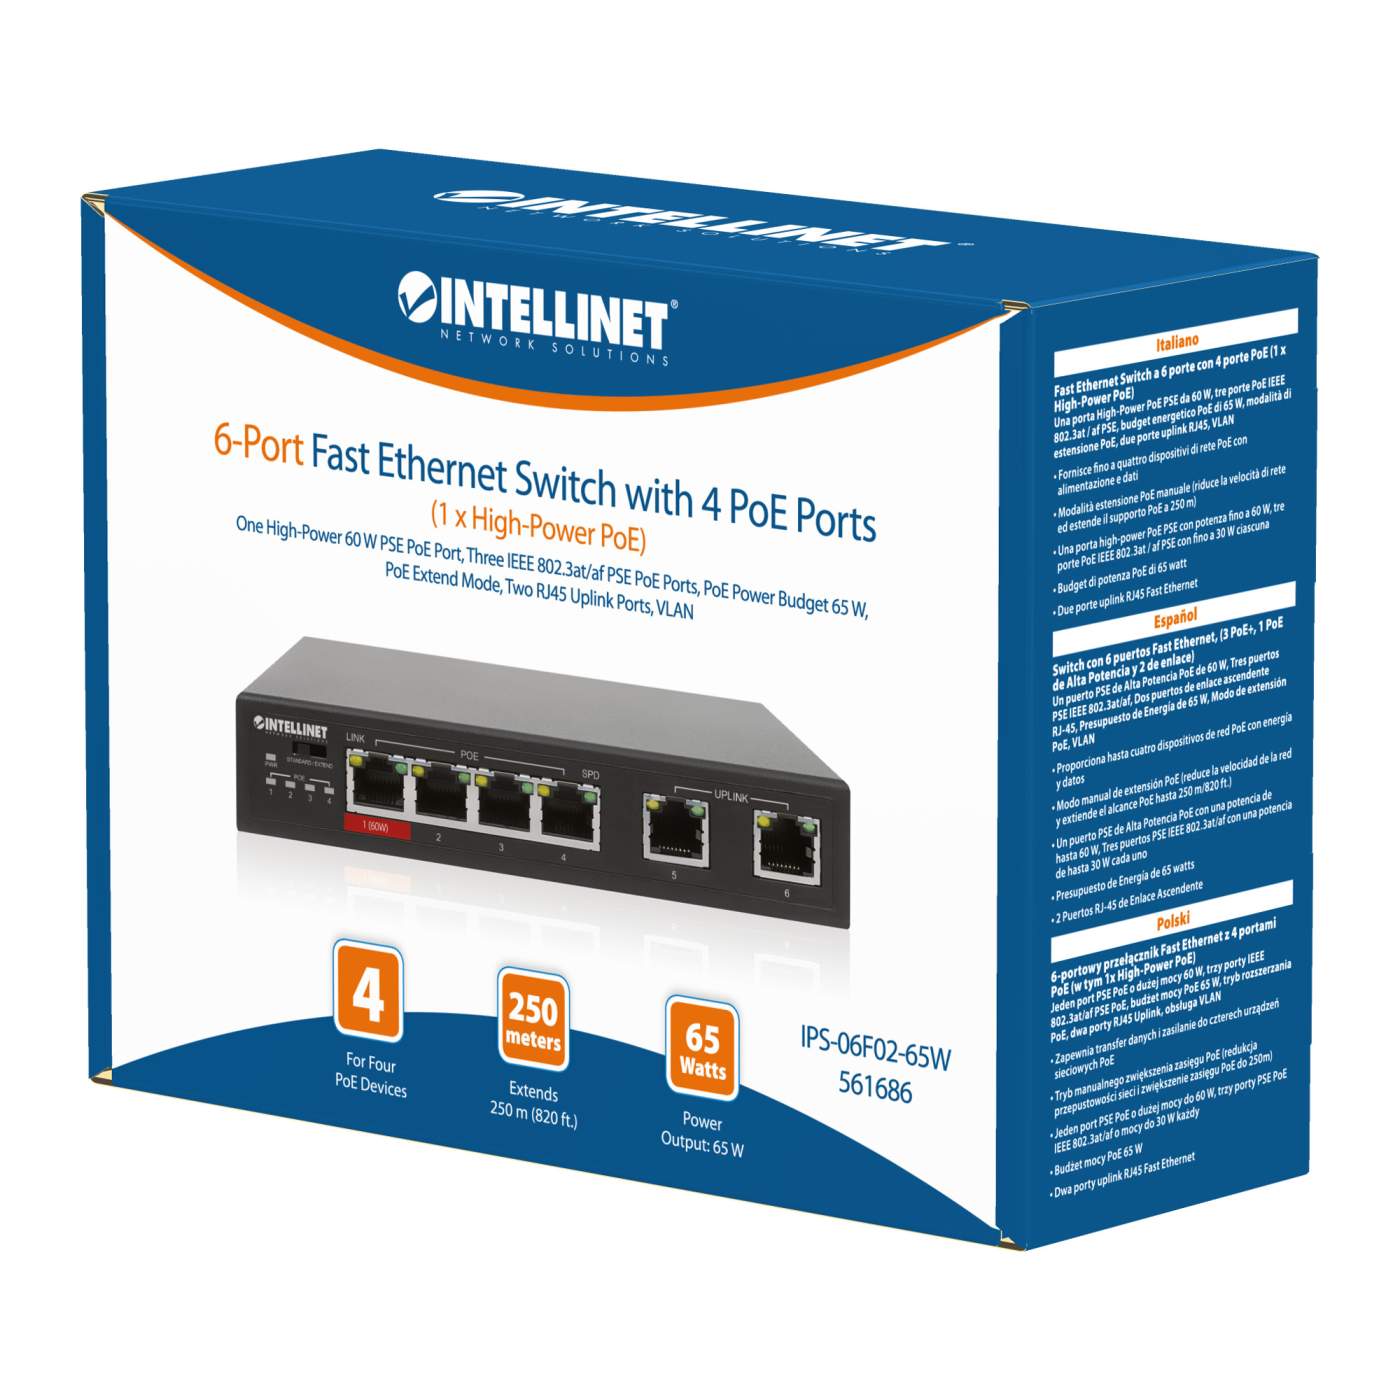 6-Port Fast Ethernet Switch with 4 PoE Ports (1 x High-Power PoE) Packaging Image 2